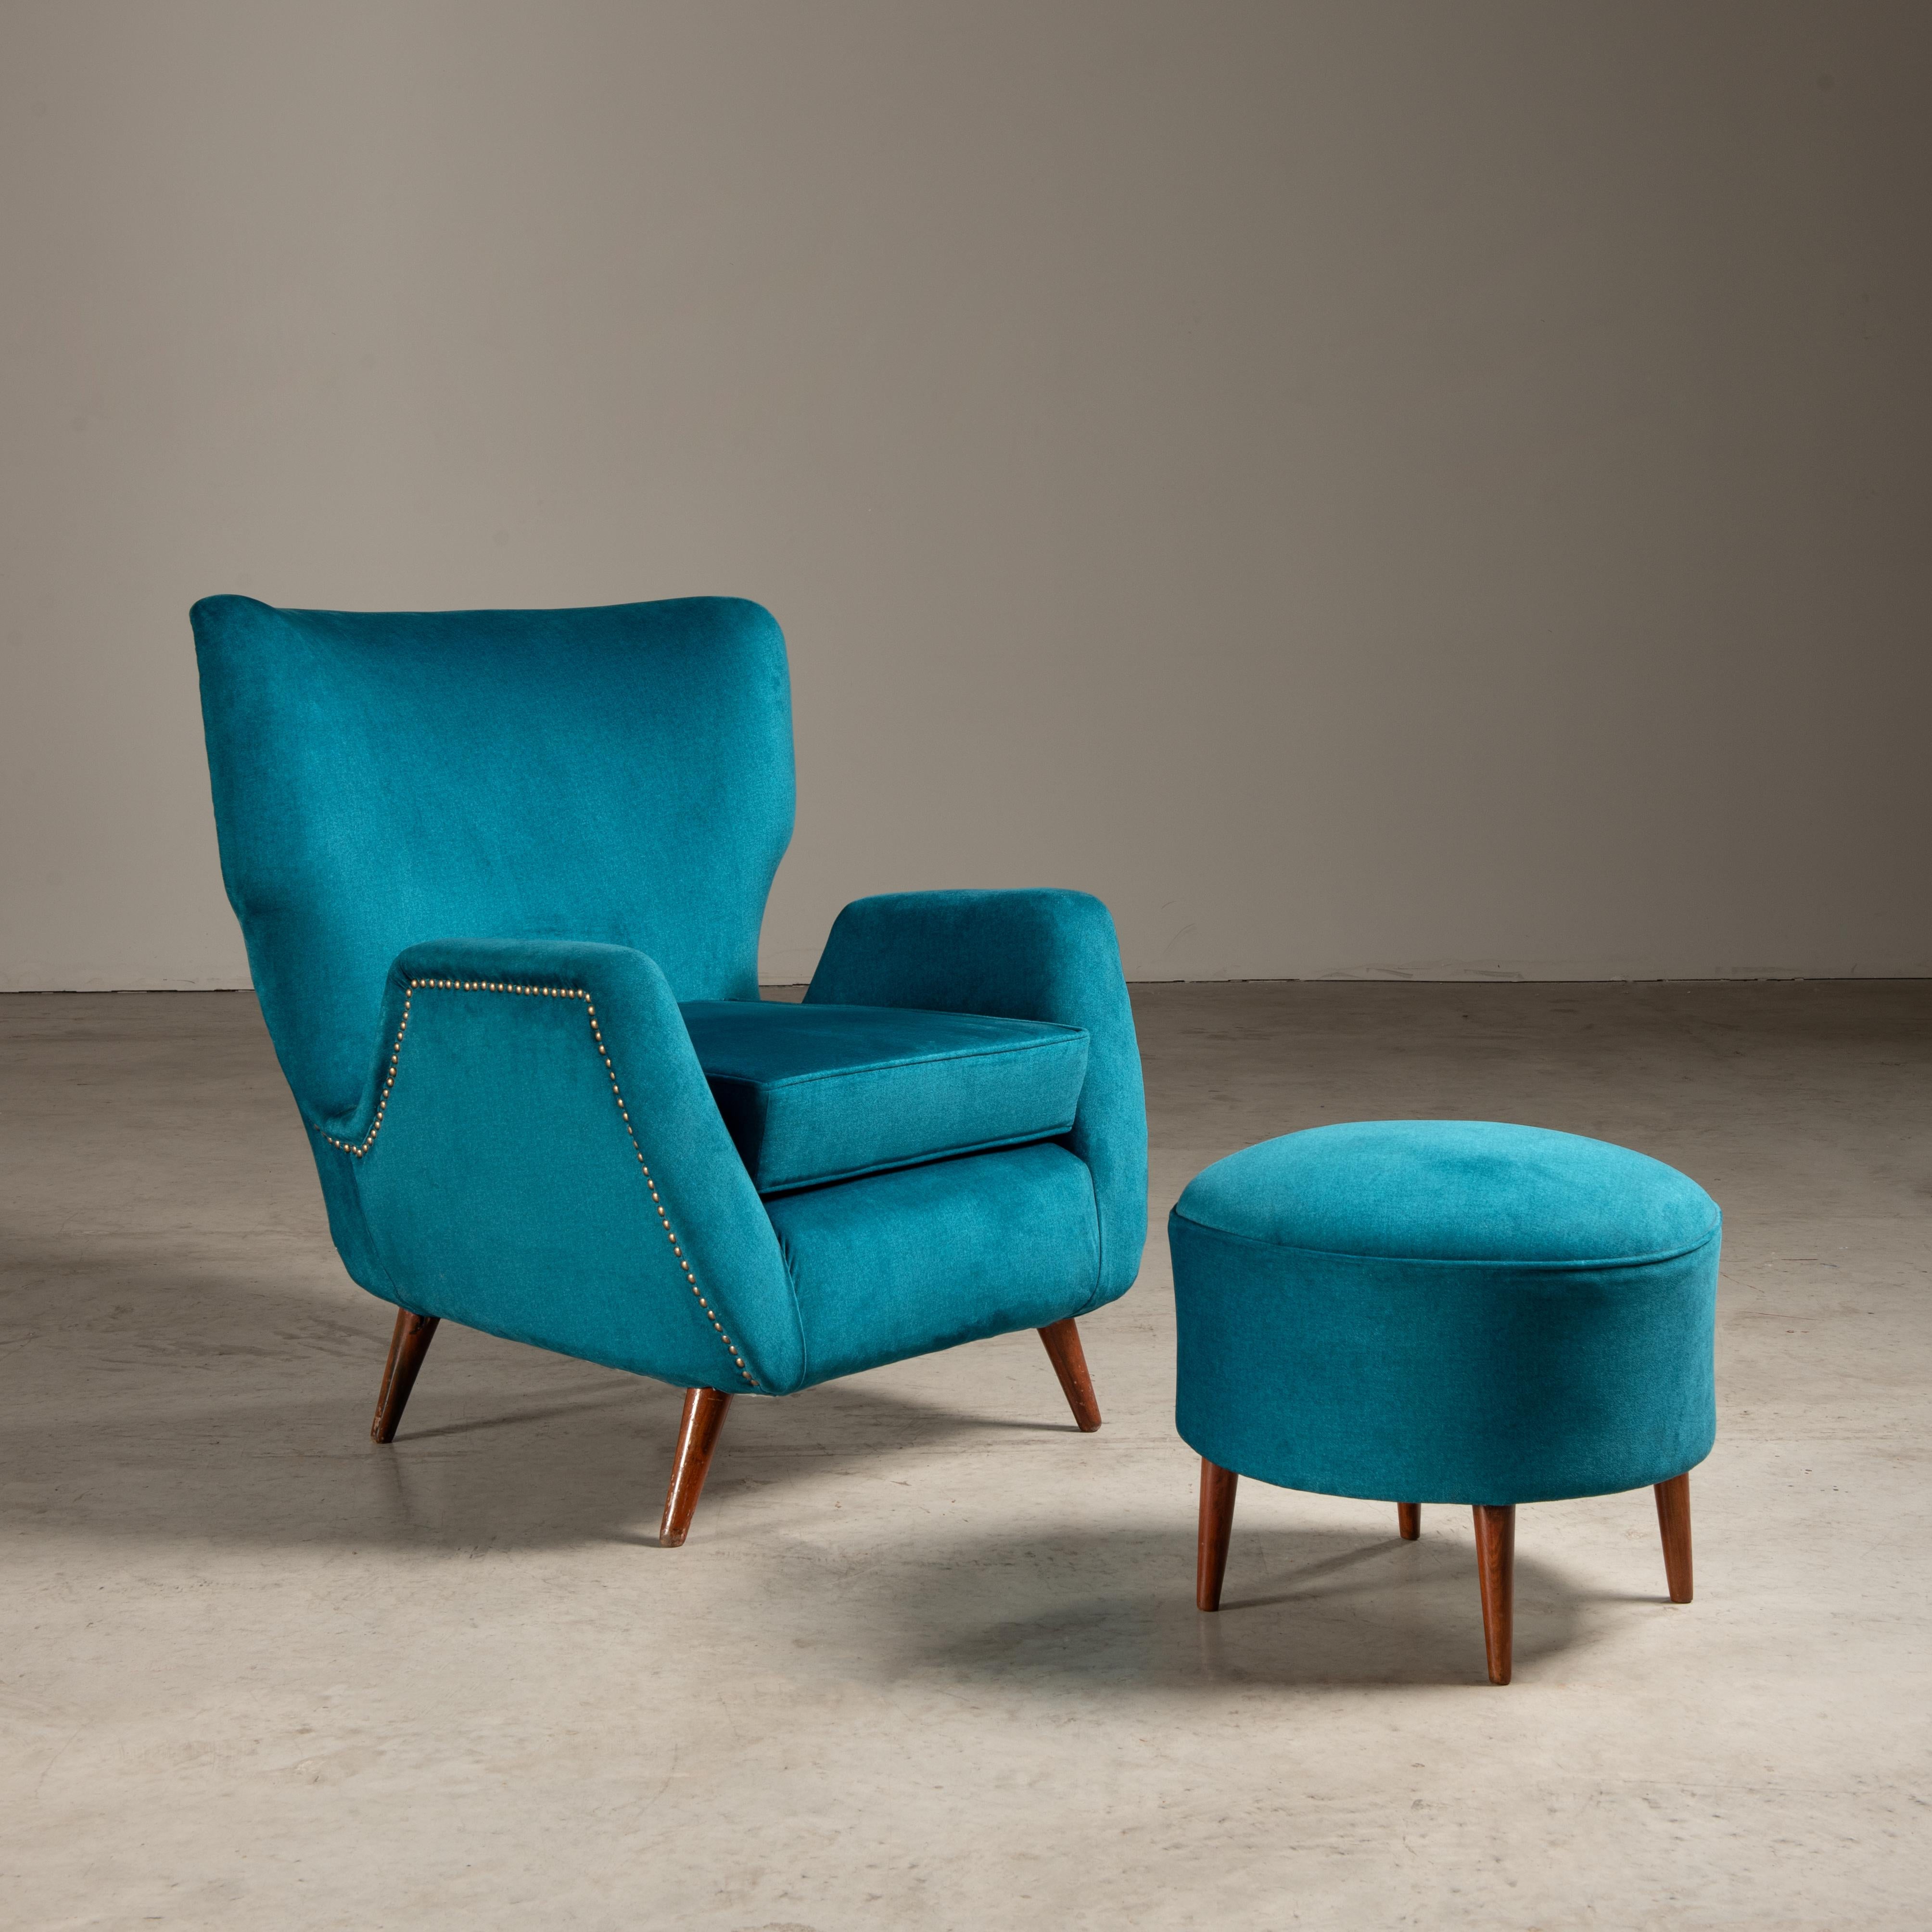 In the landscape of mid-century modern furniture, the collaborative genius of Carlo Hauner and Martin Eisler shines through in the lounge chair and ottoman set that exemplifies the Brazilian interpretation of the style. This particular set, with its